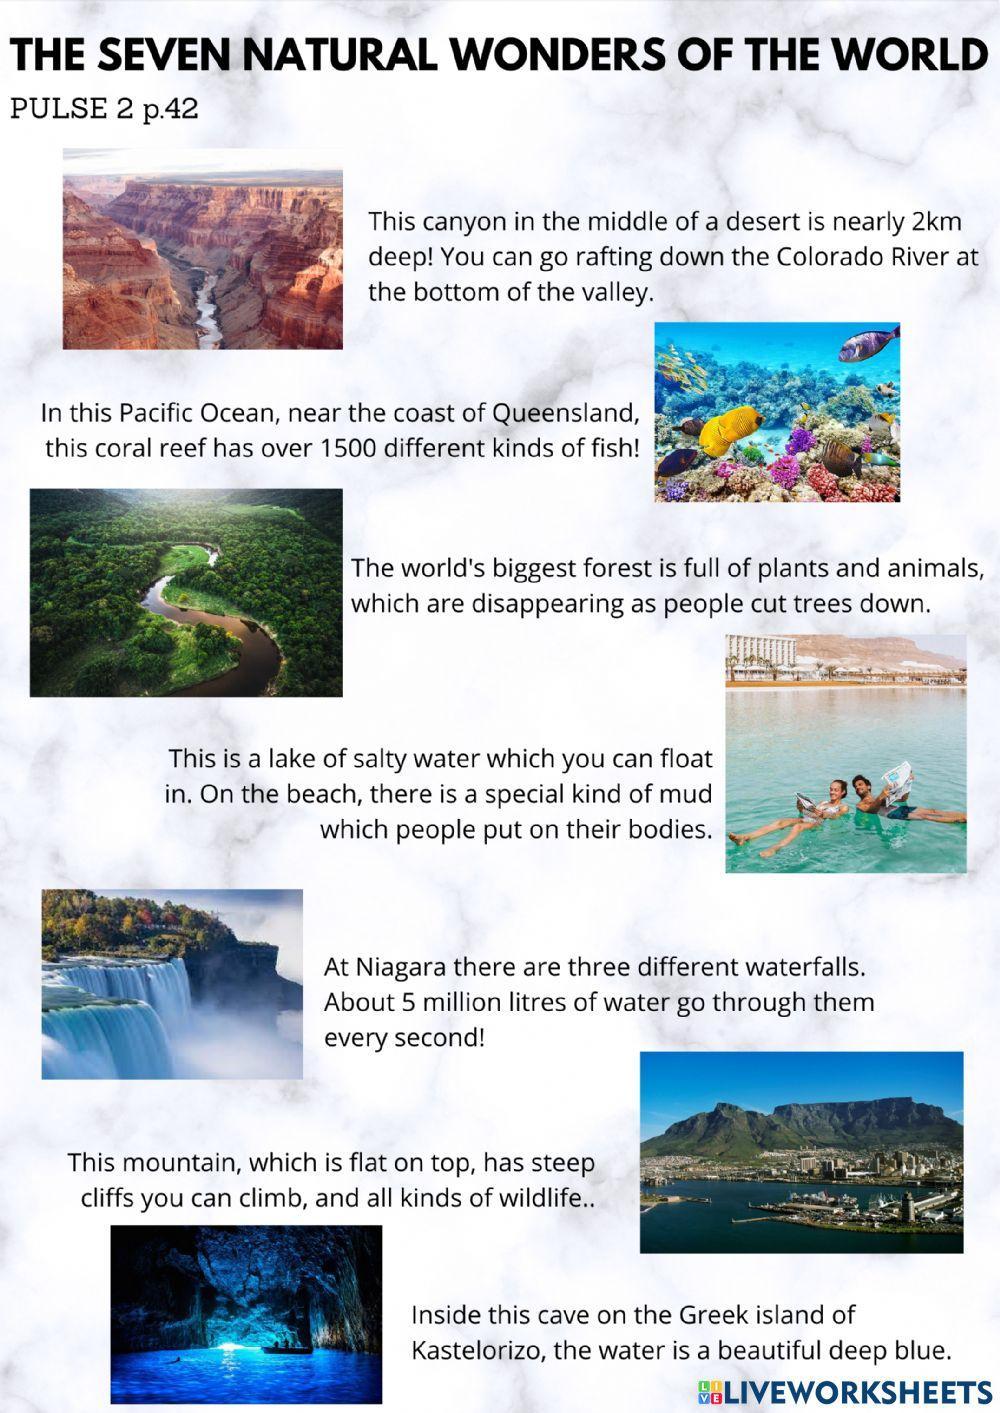 The Seven Natural Wonders of The World